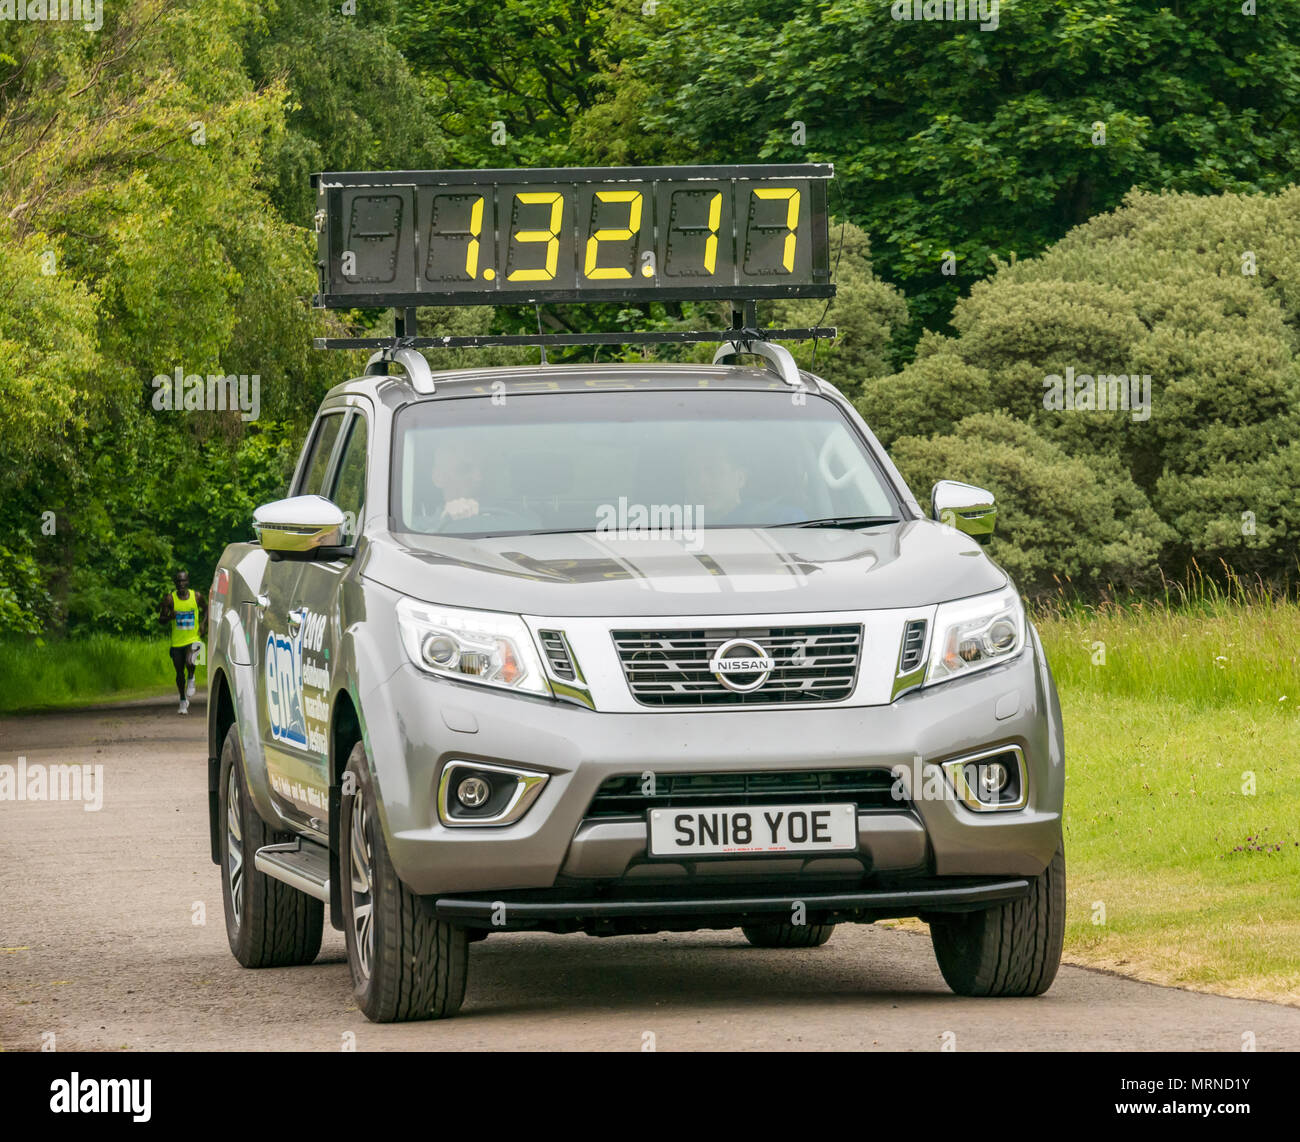 Edinburgh Marathon Festival, 26th May 2018. Gosford Estate, East Lothian, Scotland, UK. Elite Kenyan marathon runner, Benjamin Kolum Kiptoo, with feet in the air leading at Mile 18, was the winner of the race with a new record for this event of 2 hours 33 minutes and 13 seconds. The lead car with elapsed time on digital roof display Stock Photo